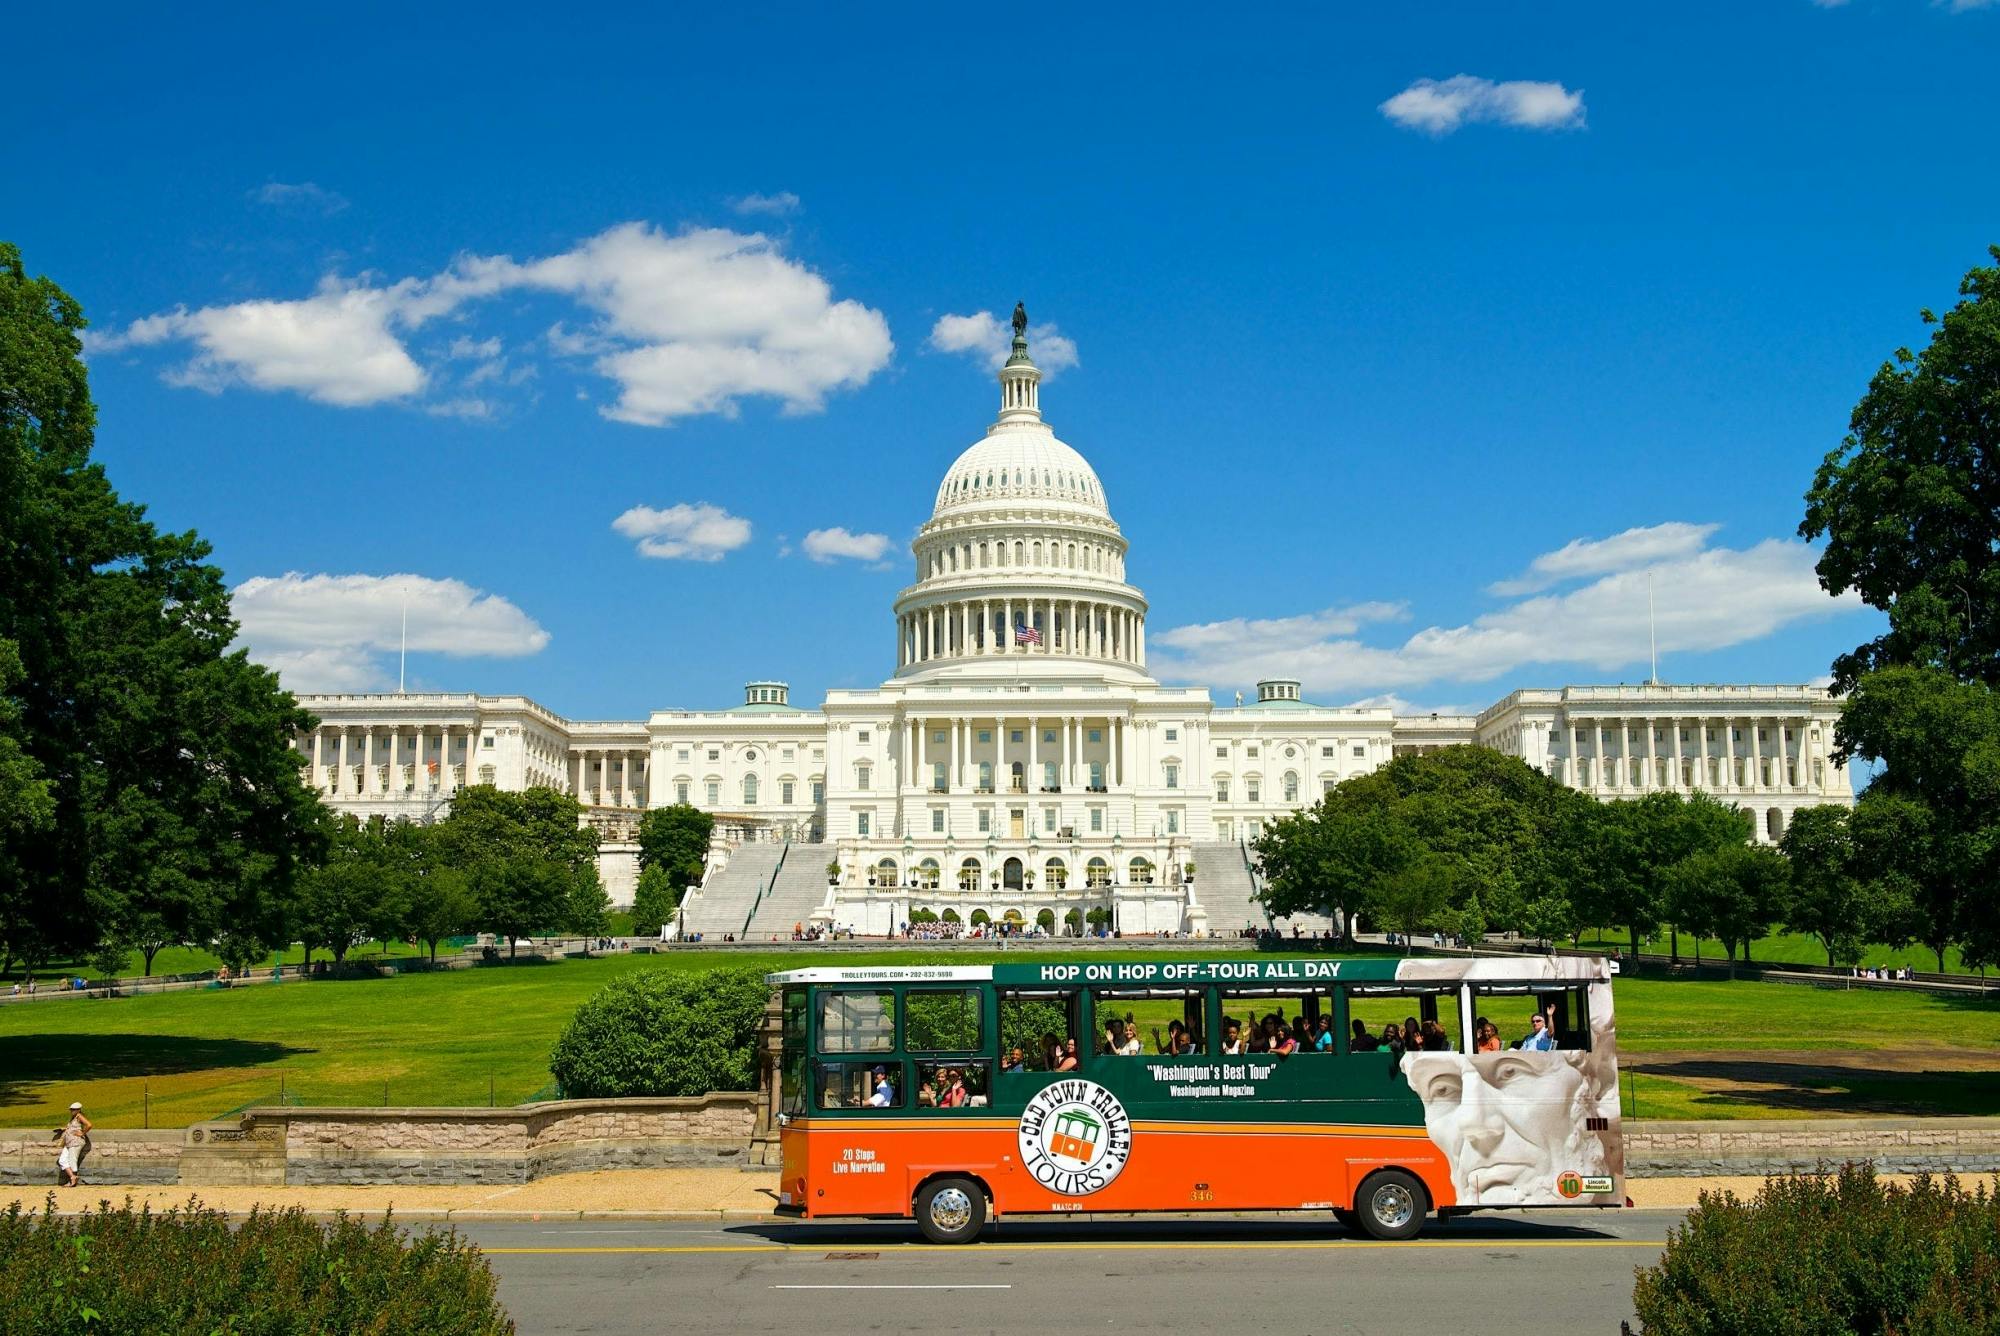 Old Town Trolley hop on off tours of Washington D.C. Musement